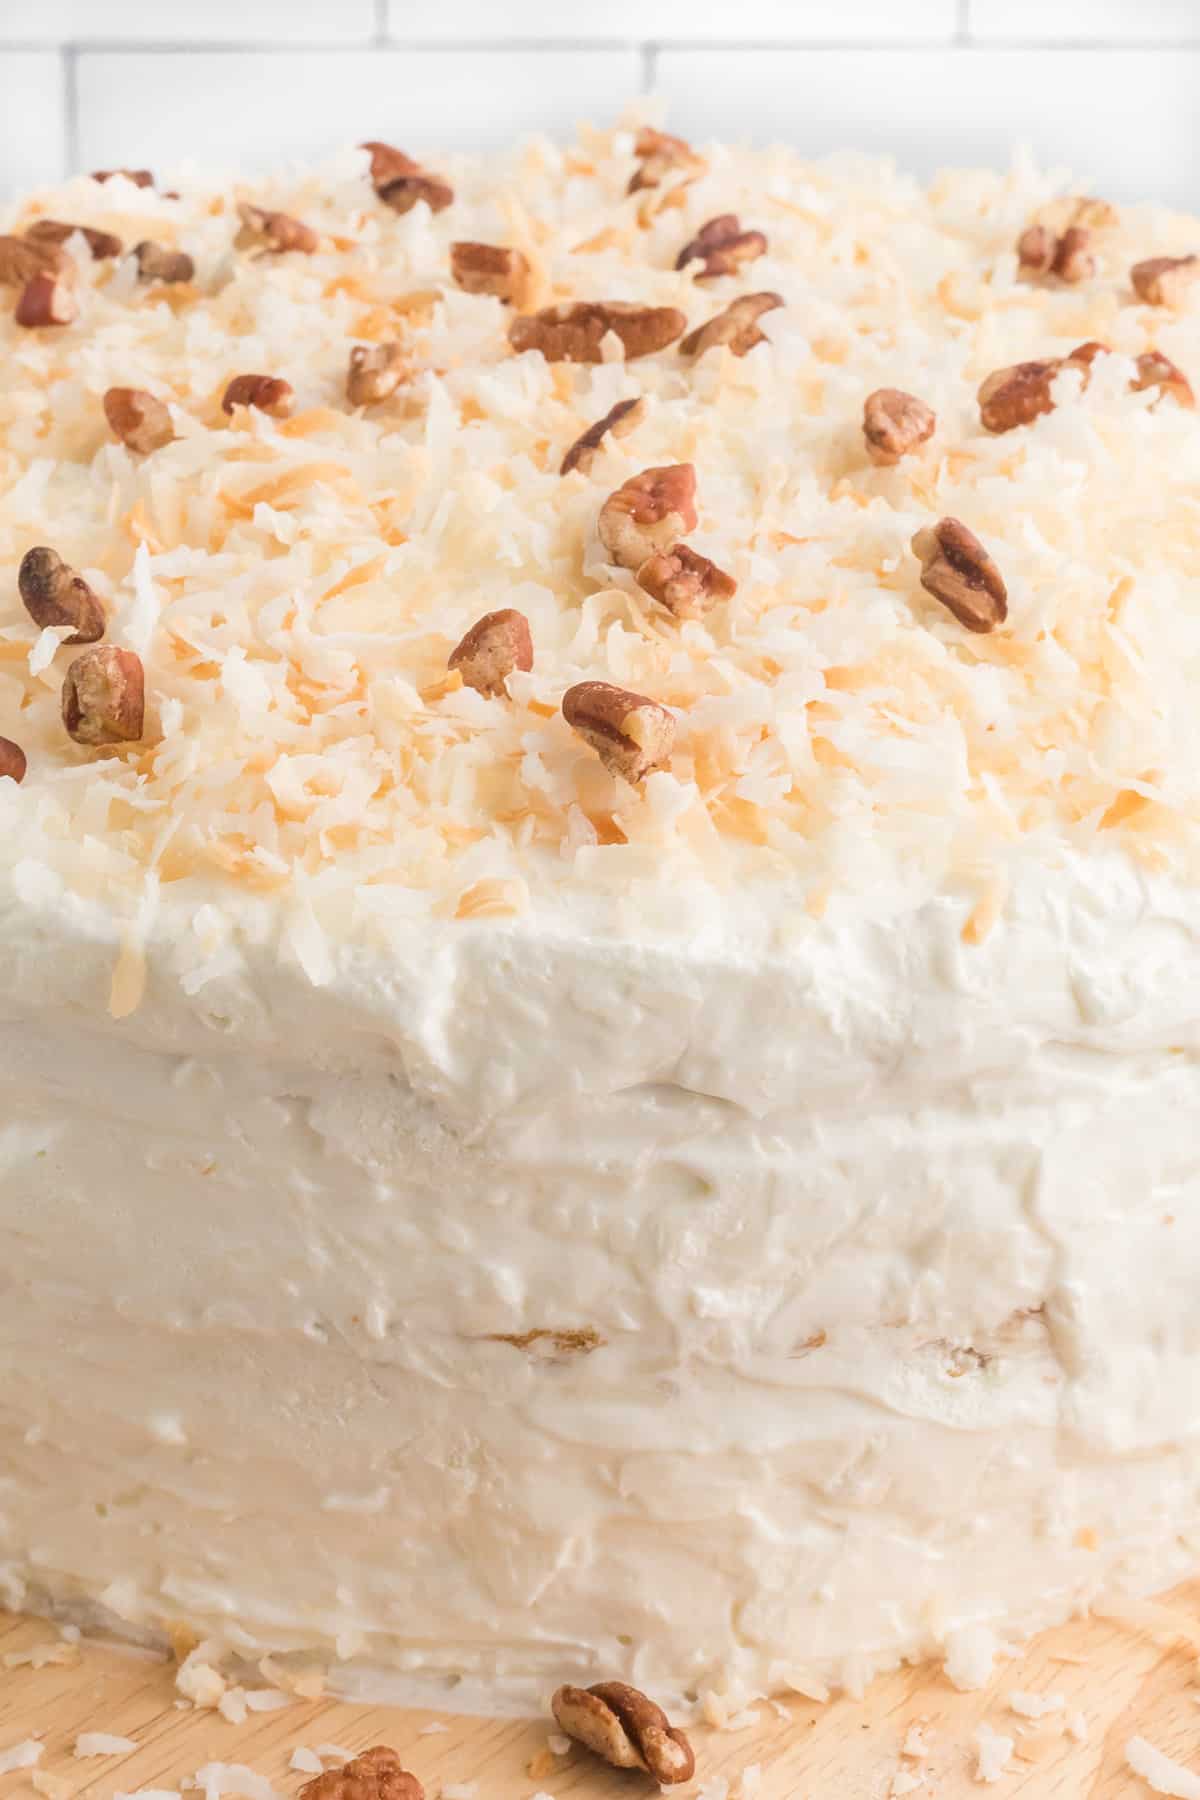 Finished cake with toasted coconut and pecan garnishes.